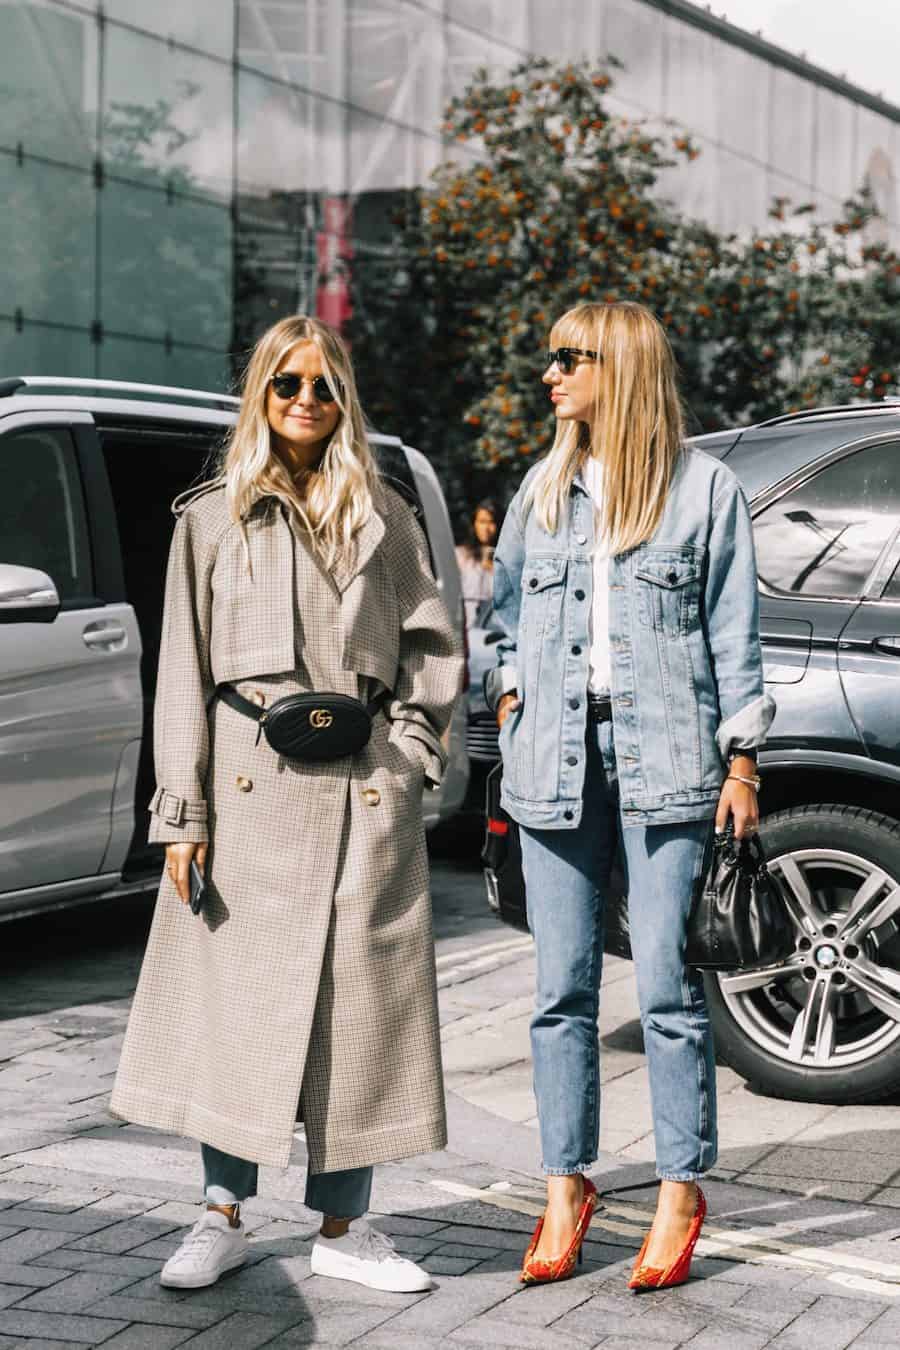 image of two women standing in the street, one wearing a long plaid trench coat with black Gucci waist bag, and the other in a denim jacket and jeans